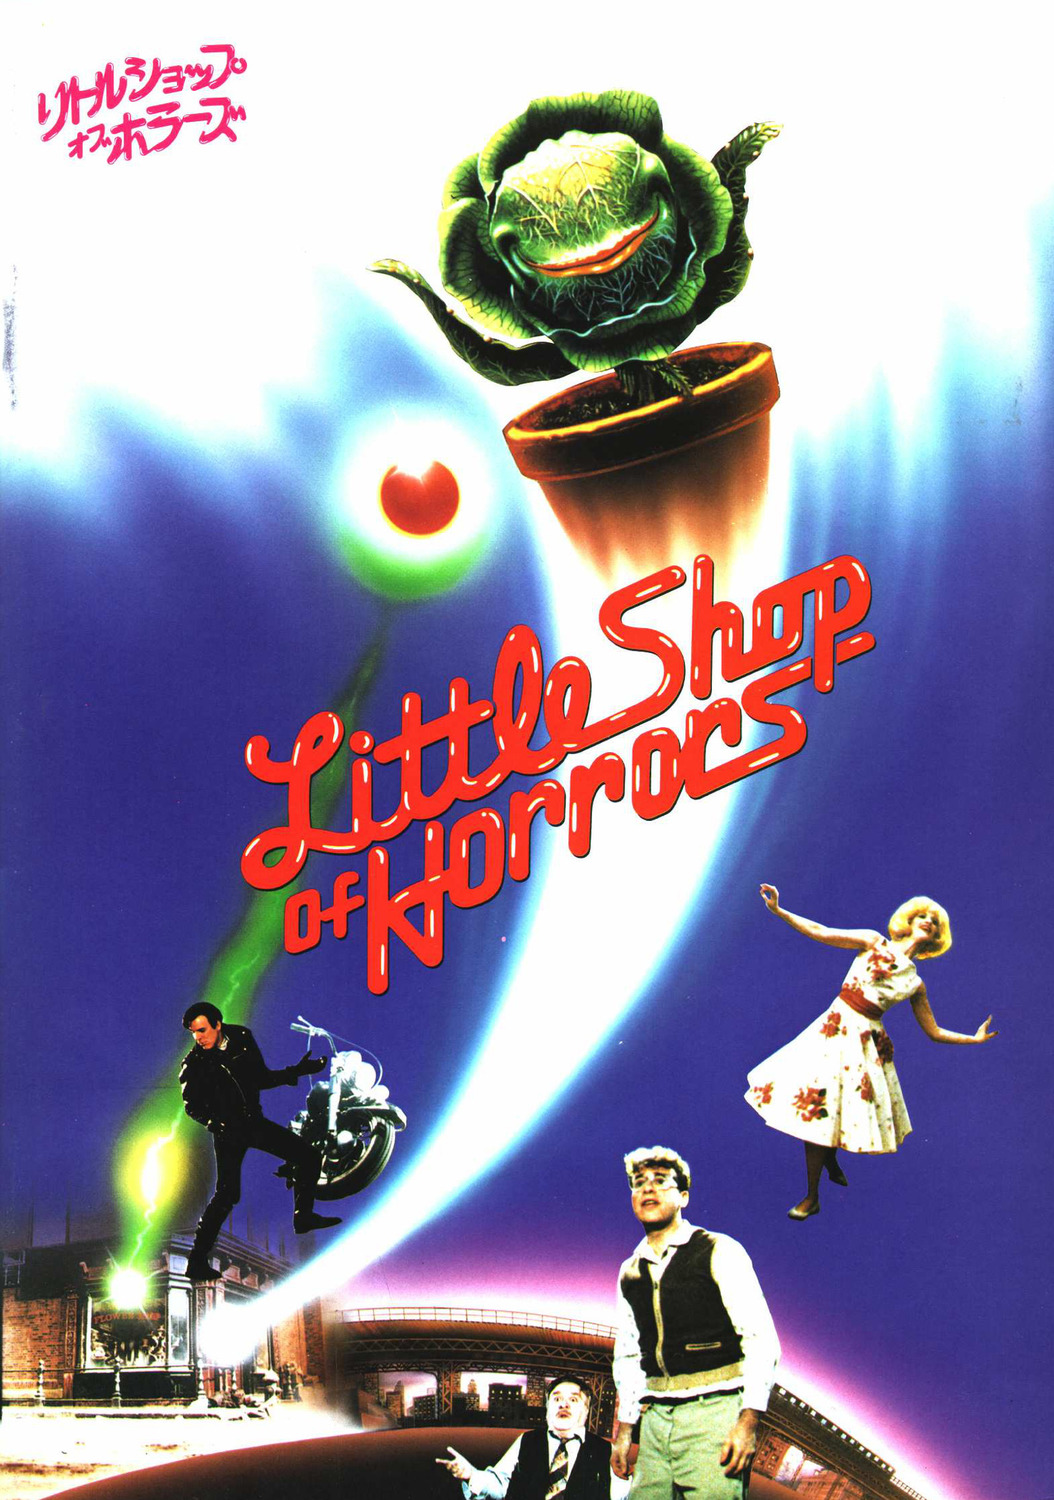 Extra Large Movie Poster Image for Little Shop of Horrors (#3 of 3)